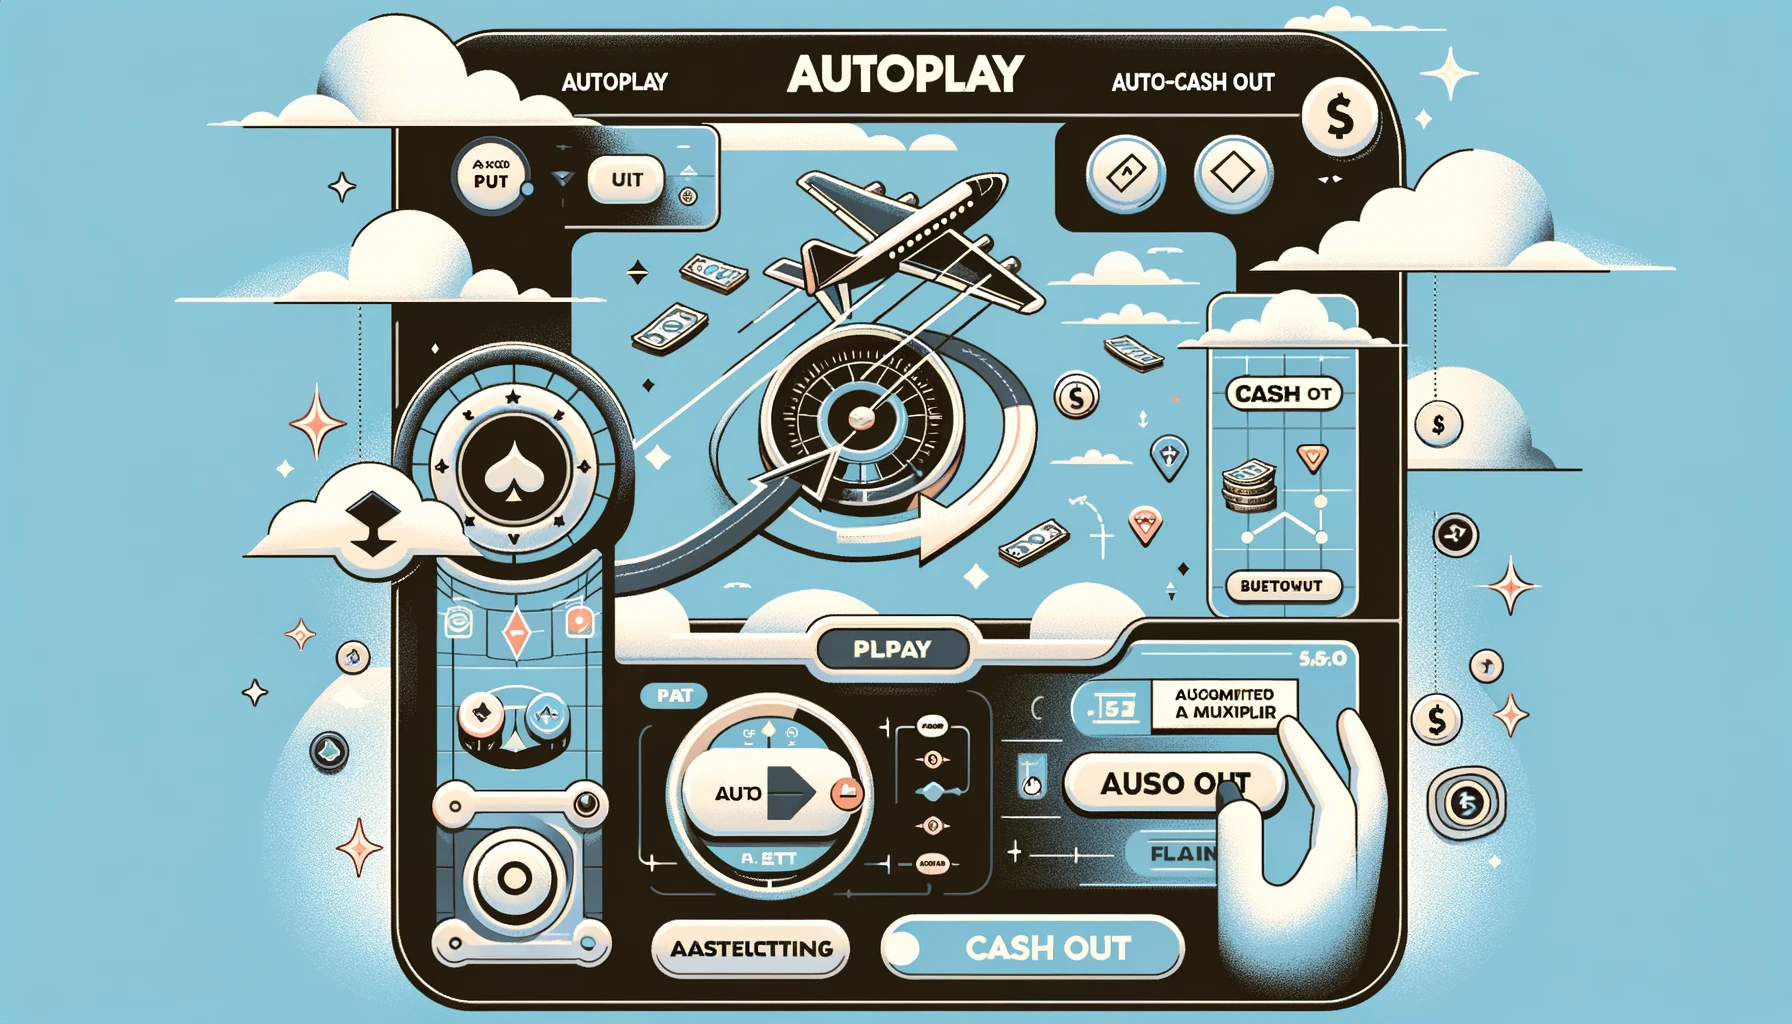 Autoplay and Auto-Cash Out